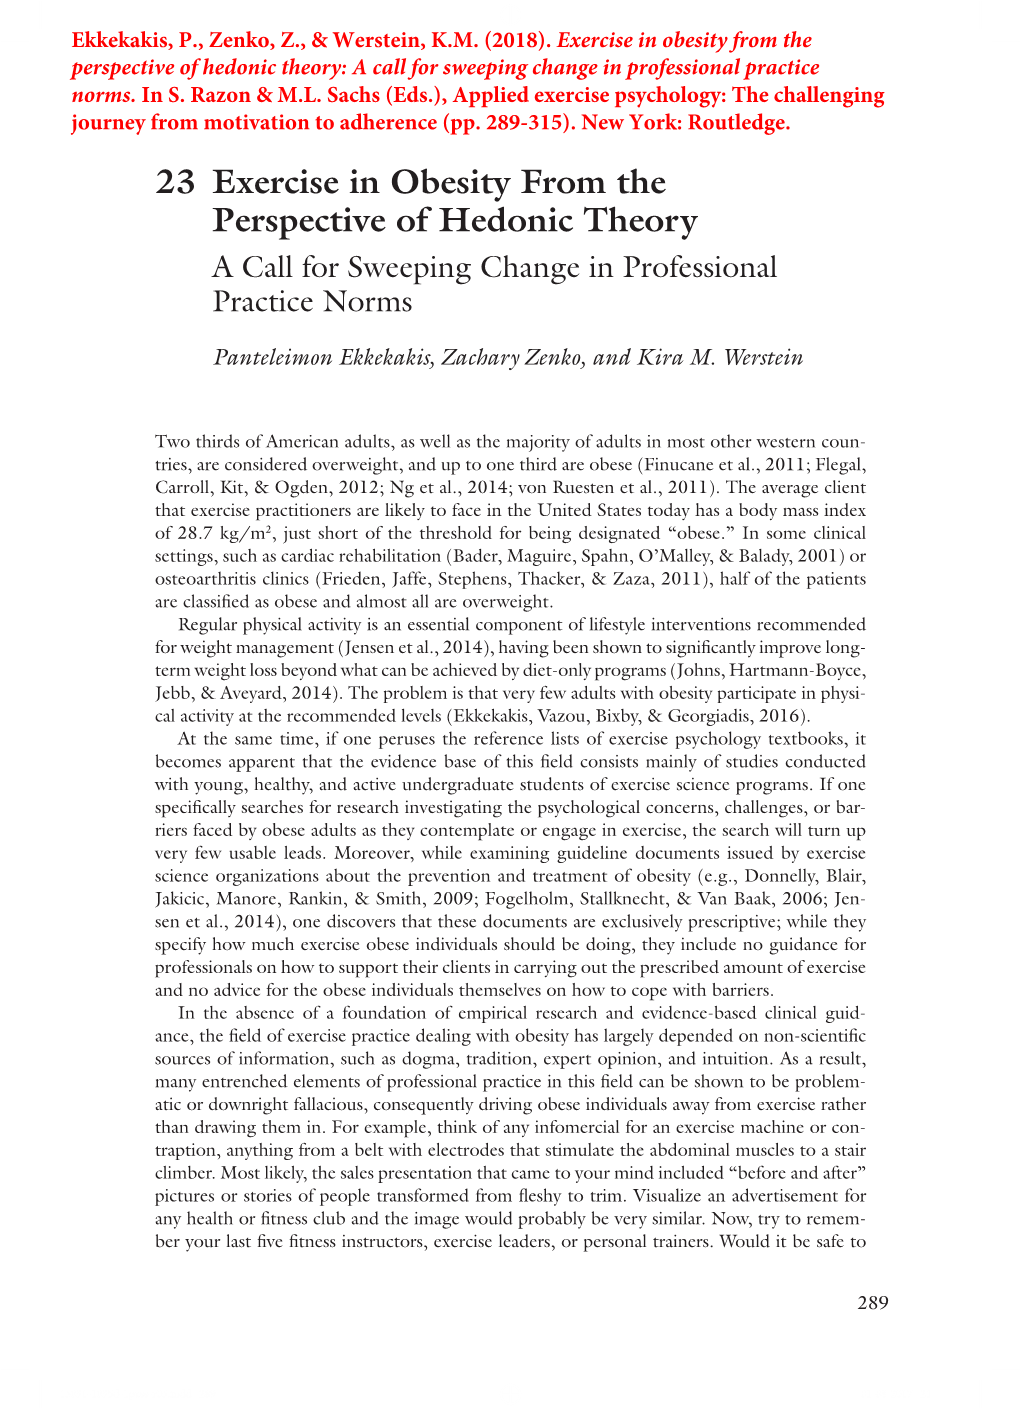 23 Exercise in Obesity from the Perspective of Hedonic Theory a Call for Sweeping Change in Professional Practice Norms